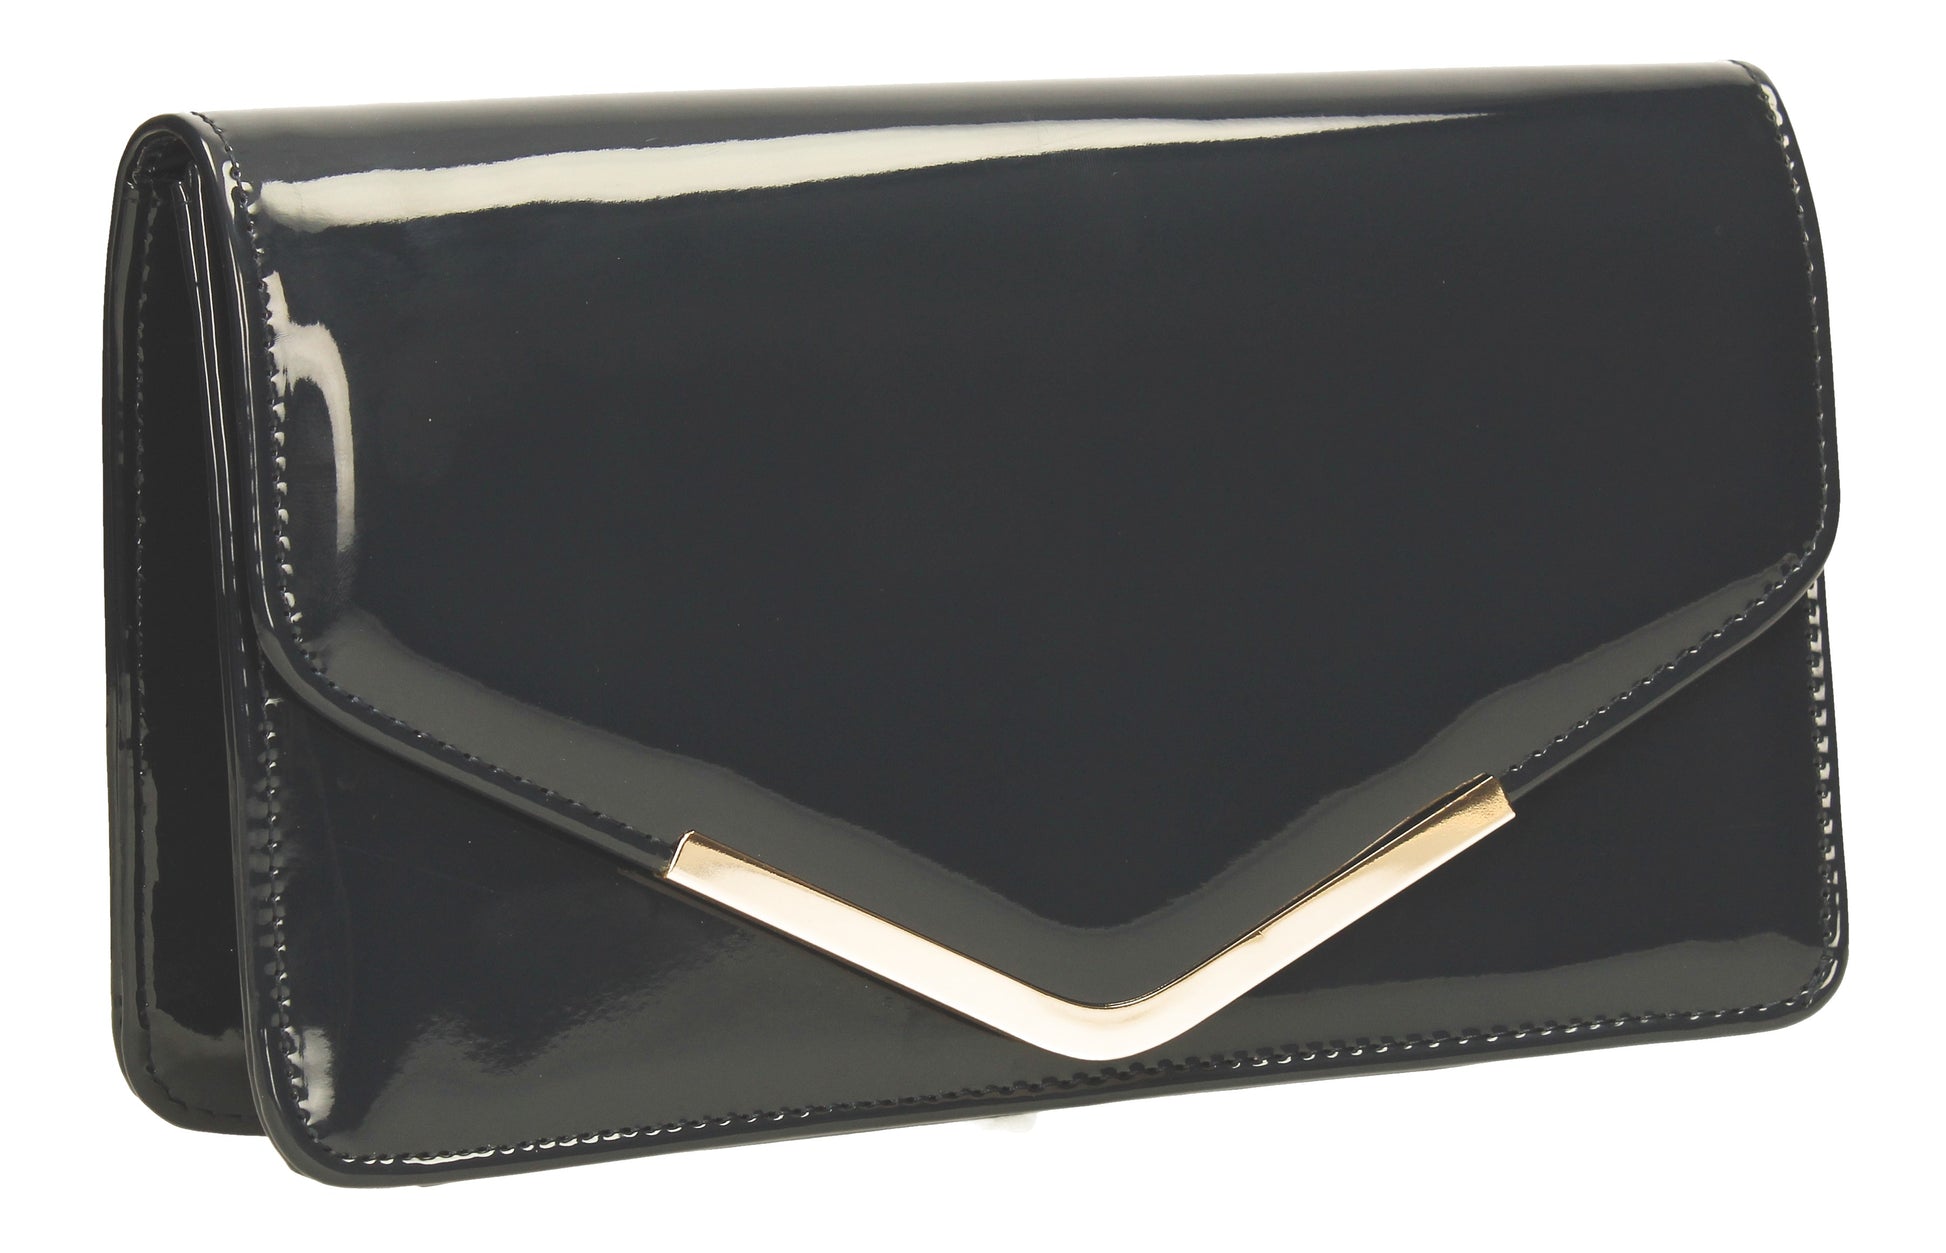 SWANKYSWANS Paris Patent Clutch Bag Navy Cute Cheap Clutch Bag For Weddings School and Work